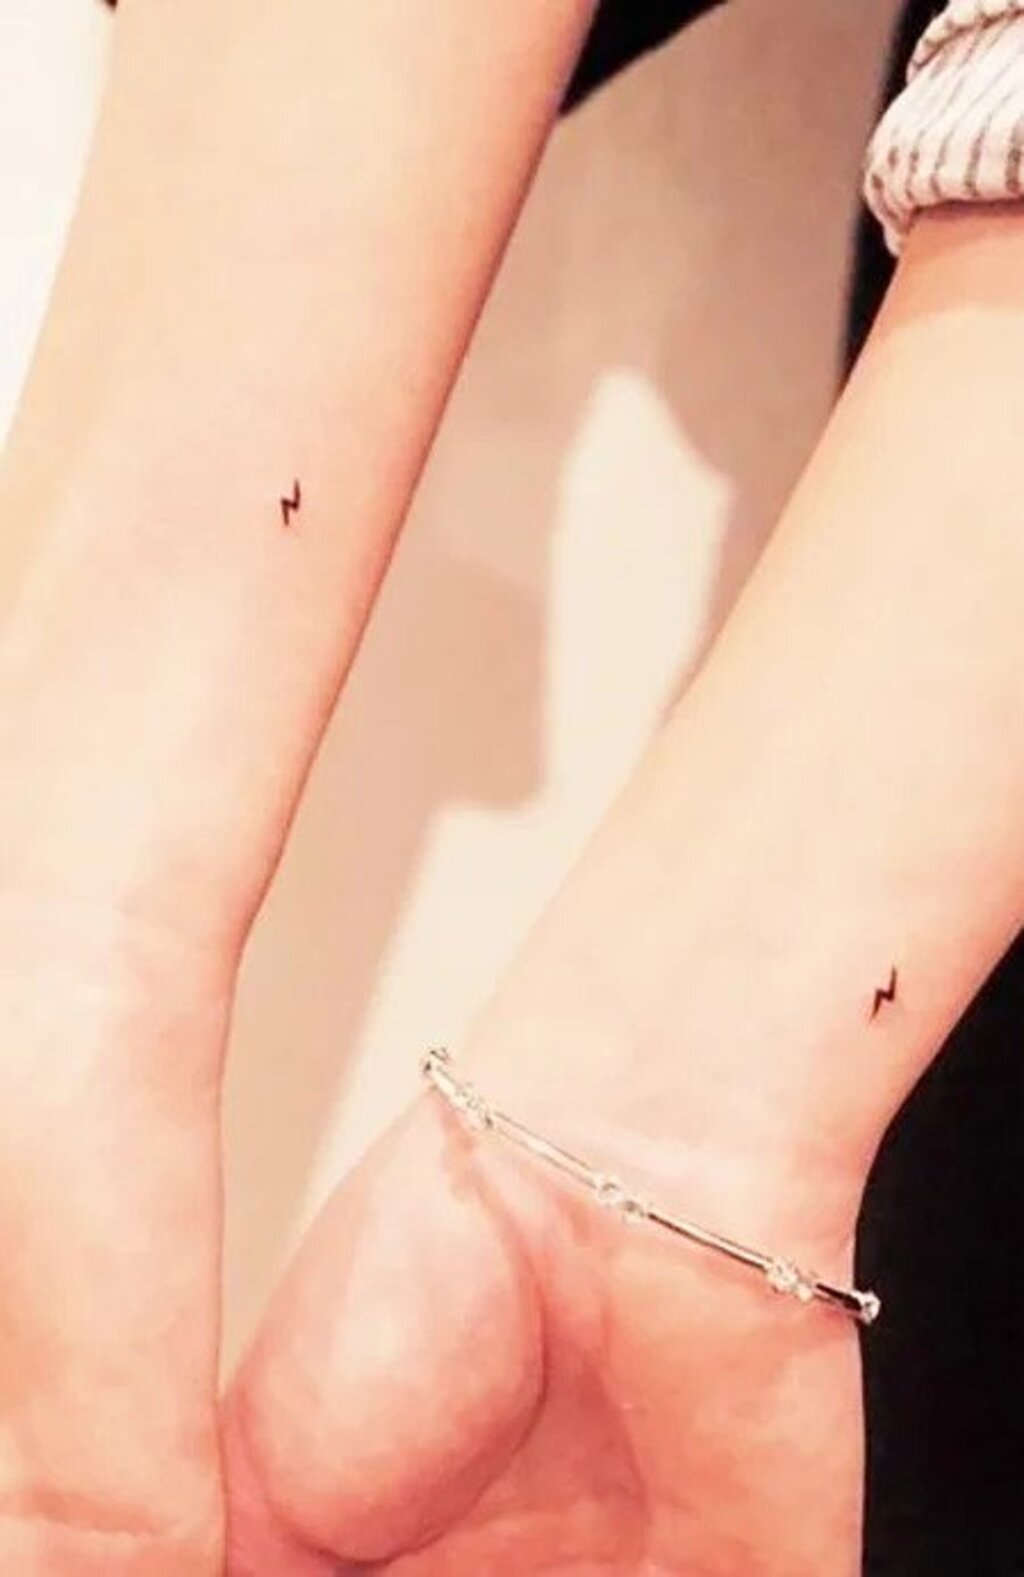 13 Mismatched Best Friend Tattoos For Besties Who Dont Want To Share  Everything  PHOTOS